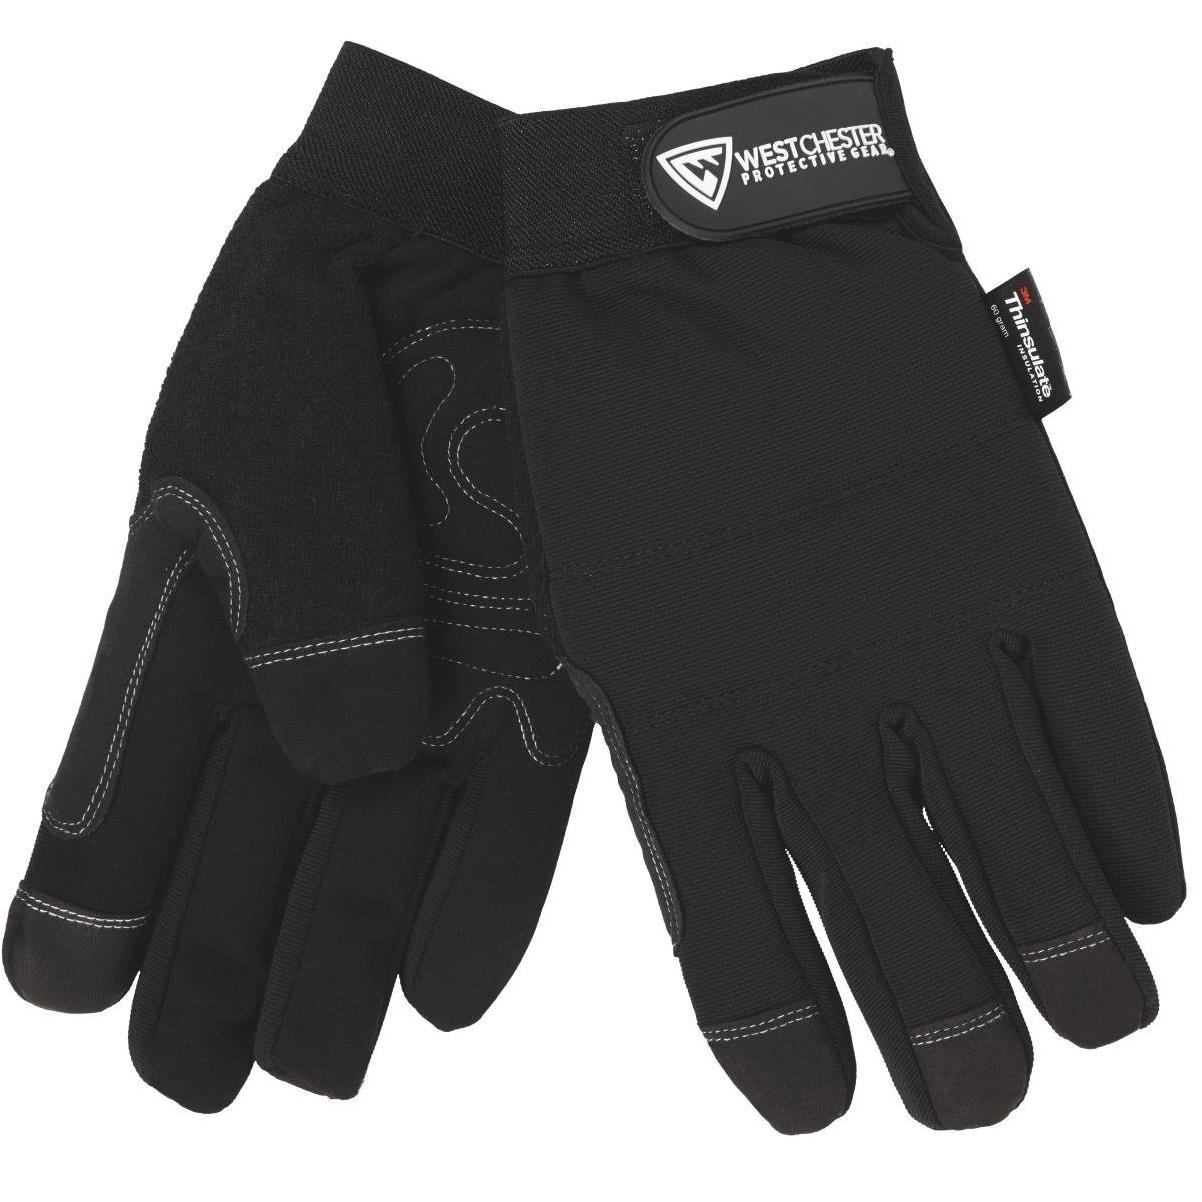 West Chester Protective Gear 3 Pk Hi-Dex Gloves 